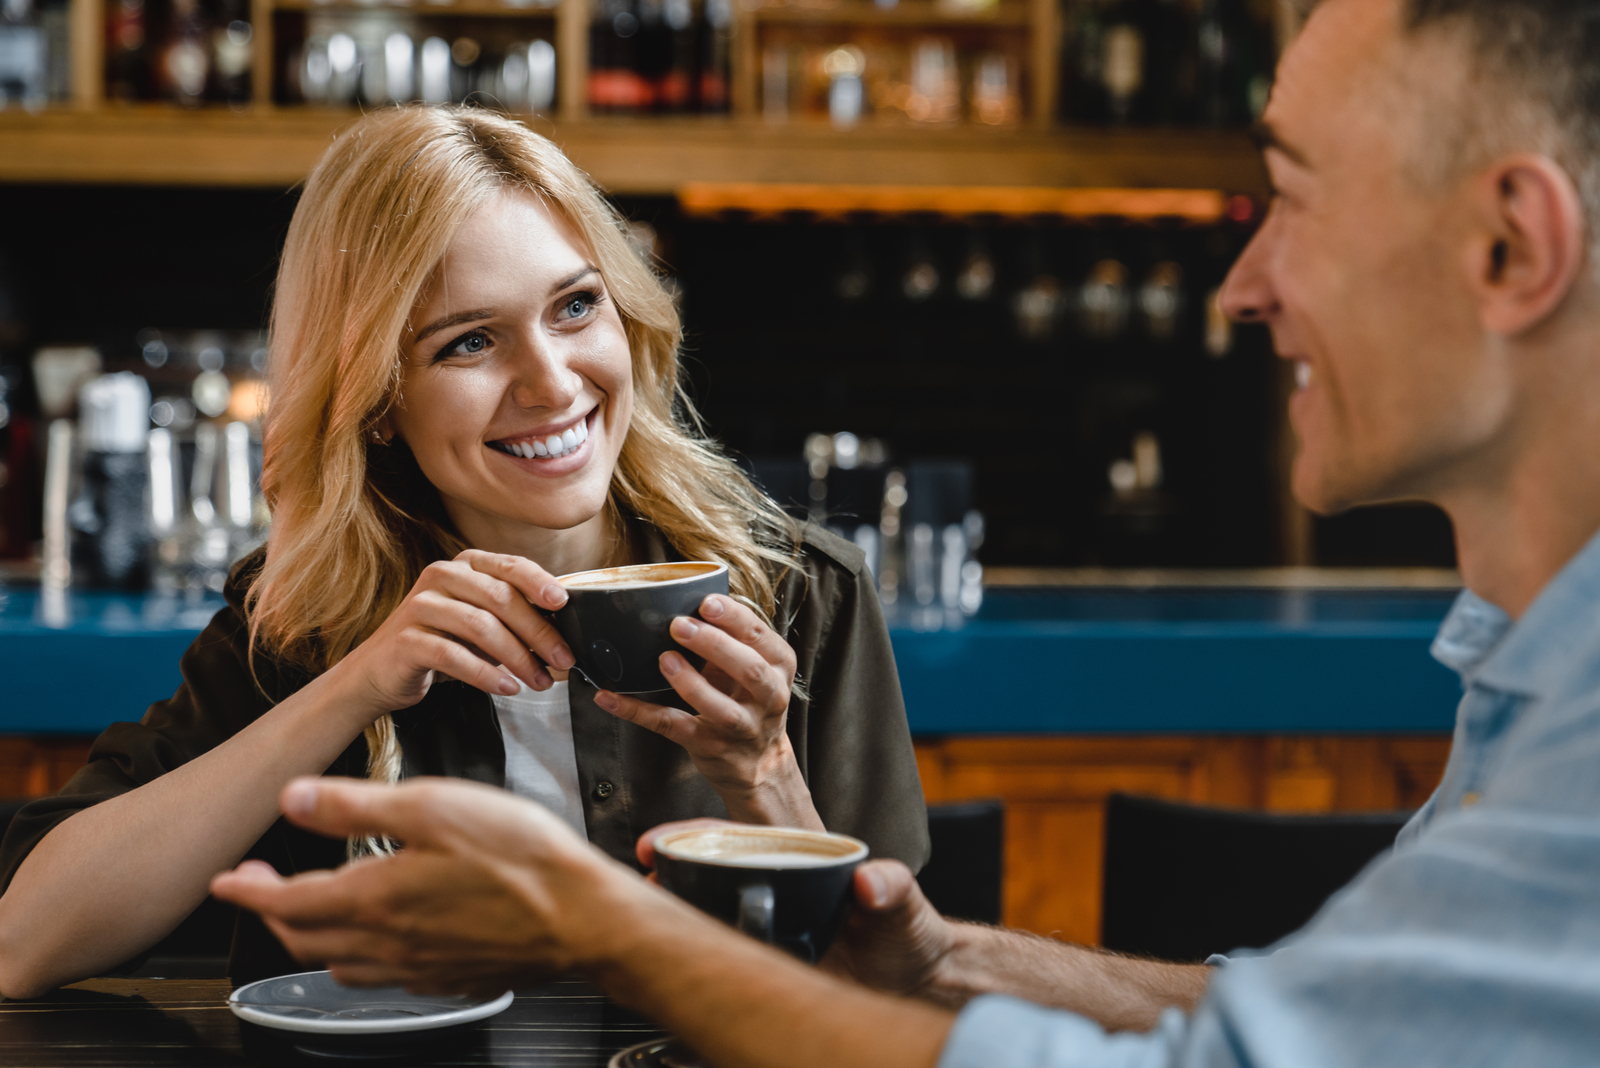 a smiling woman with long blonde hair is talking to a man while drinking coffee